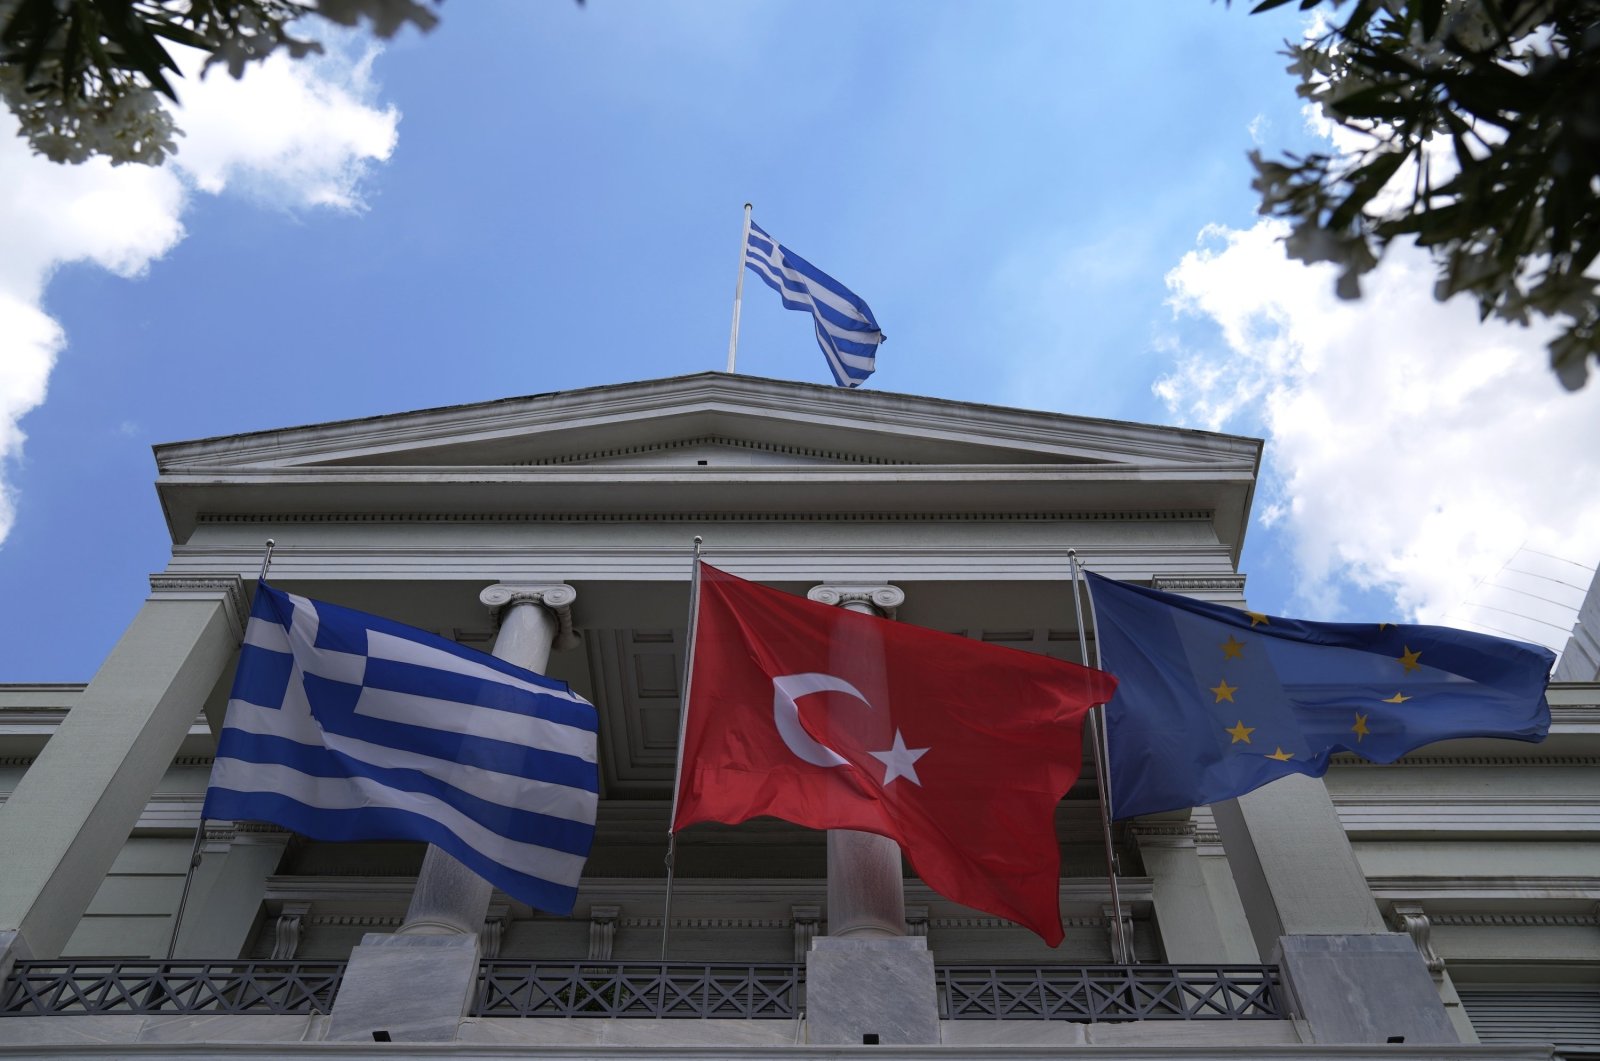 Greek (L), Turkish (C) and European Union flags wave on the foreign ministry house before a meeting between Greek Foreign Minister Nikos Dendias and his Turkish counterpart Mevlüt Çavuşoğlu in Athens, Greece, May 31, 2021. (AP File Photo)